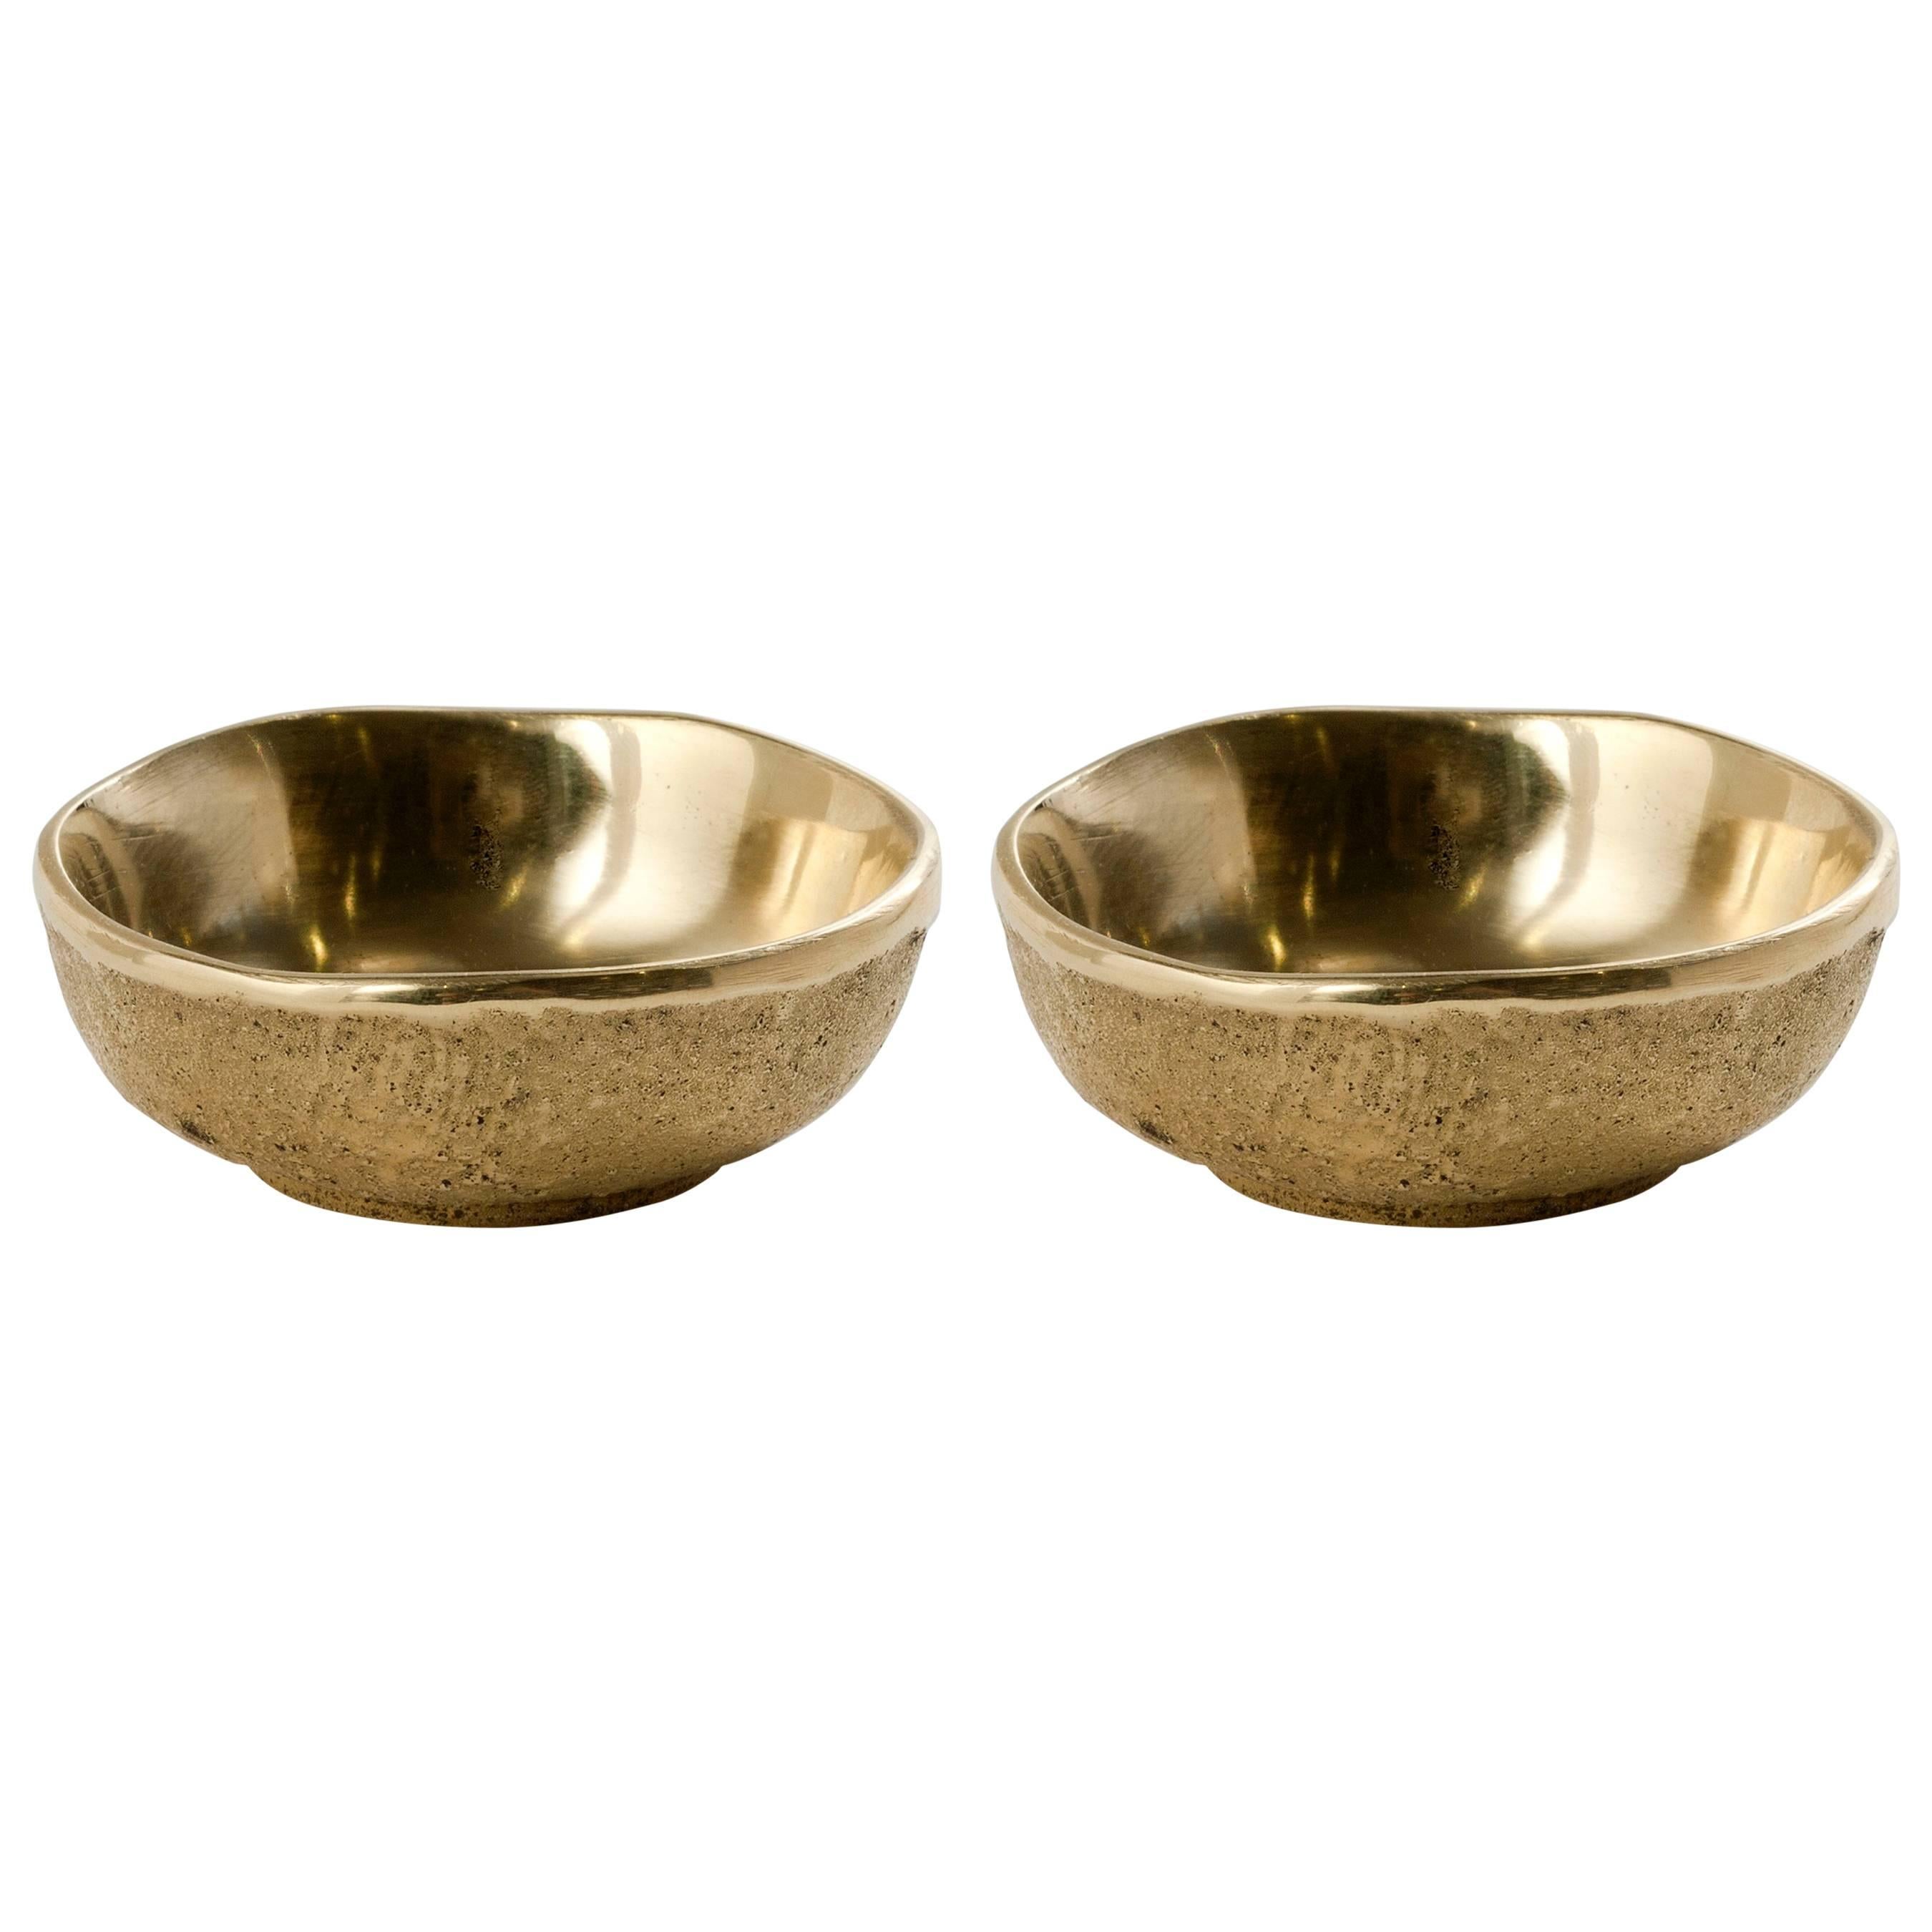 Pair of Sand Cast Bronze Bowls by Jaimal Odedra